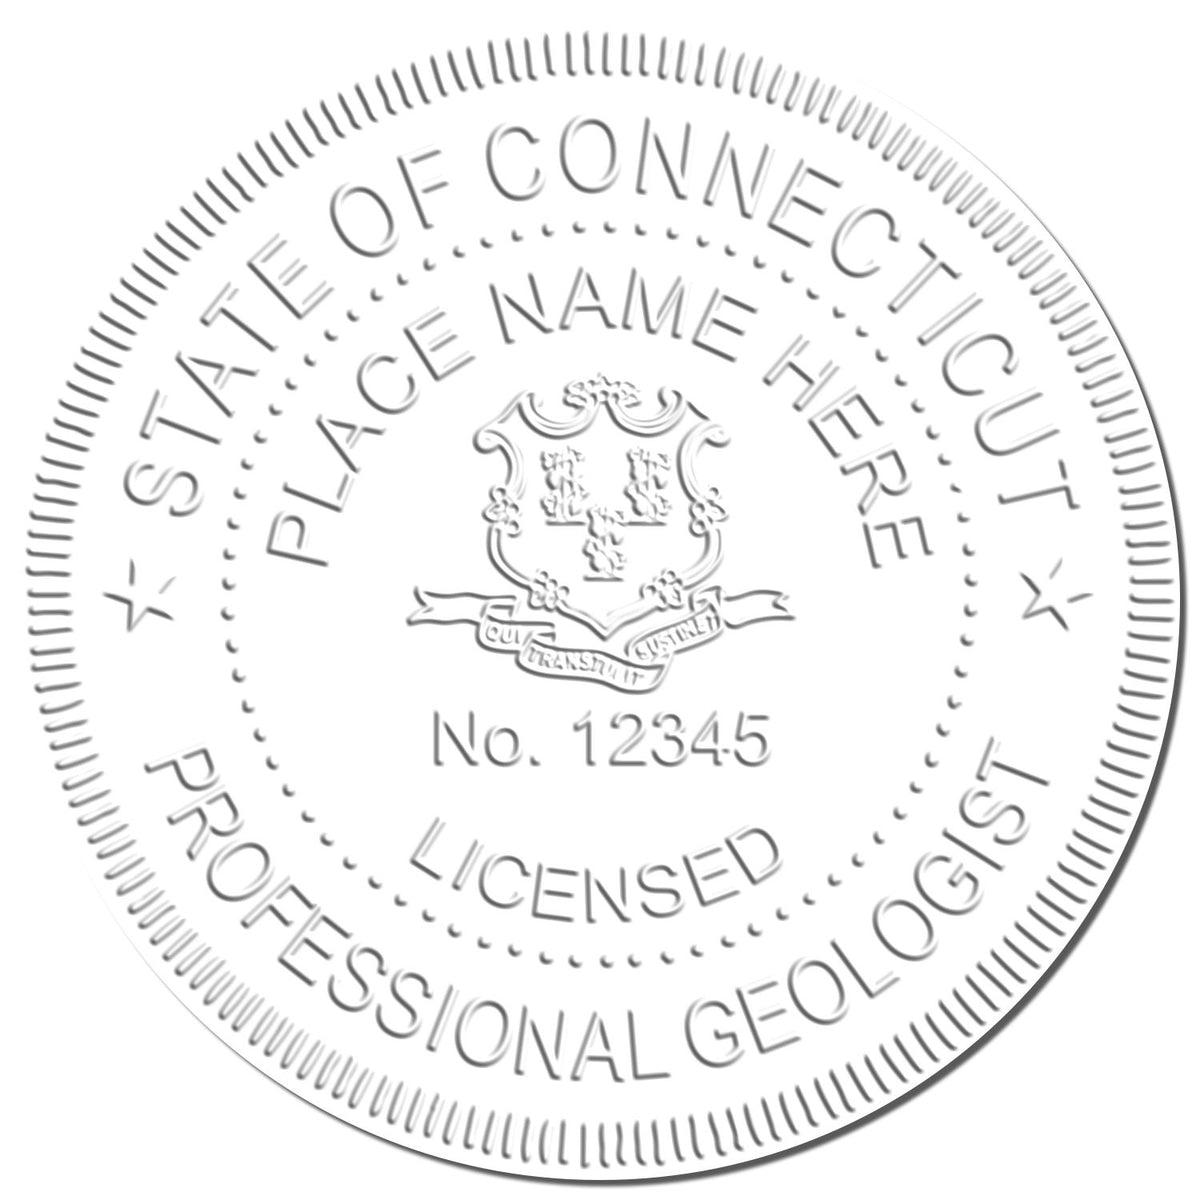 A photograph of the Hybrid Connecticut Geologist Seal stamp impression reveals a vivid, professional image of the on paper.